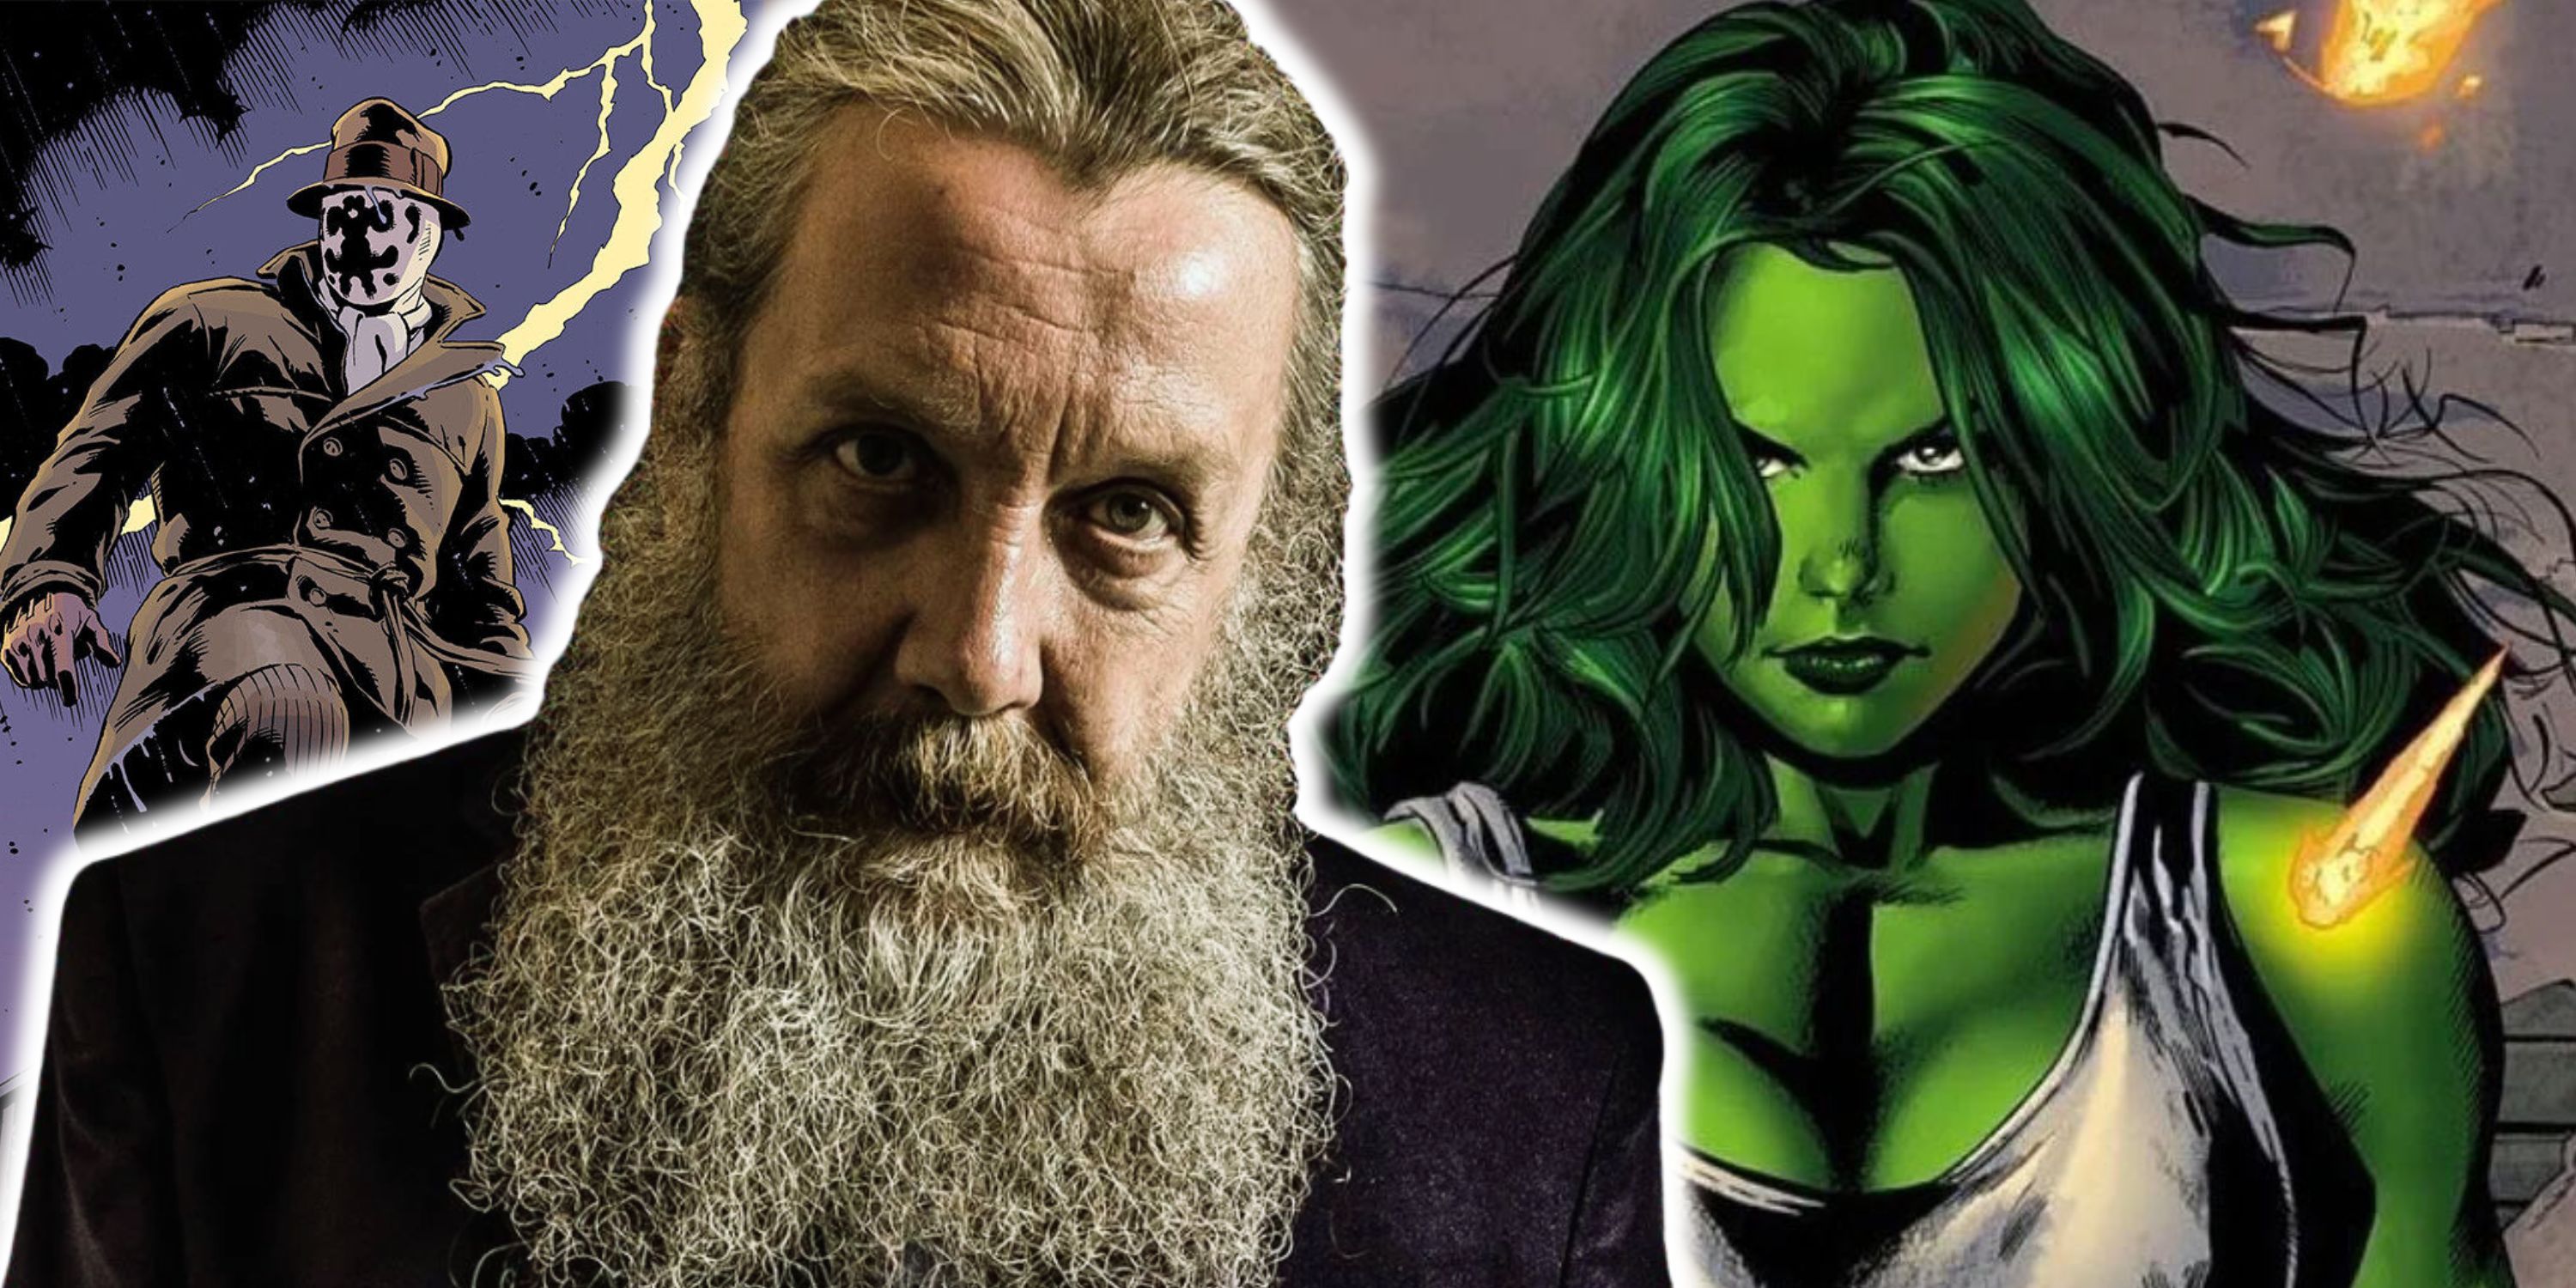 Alan Moore (foreground) with Watchmen character Rorschach (left) and Marvel hero She-Hulk (right) in background.